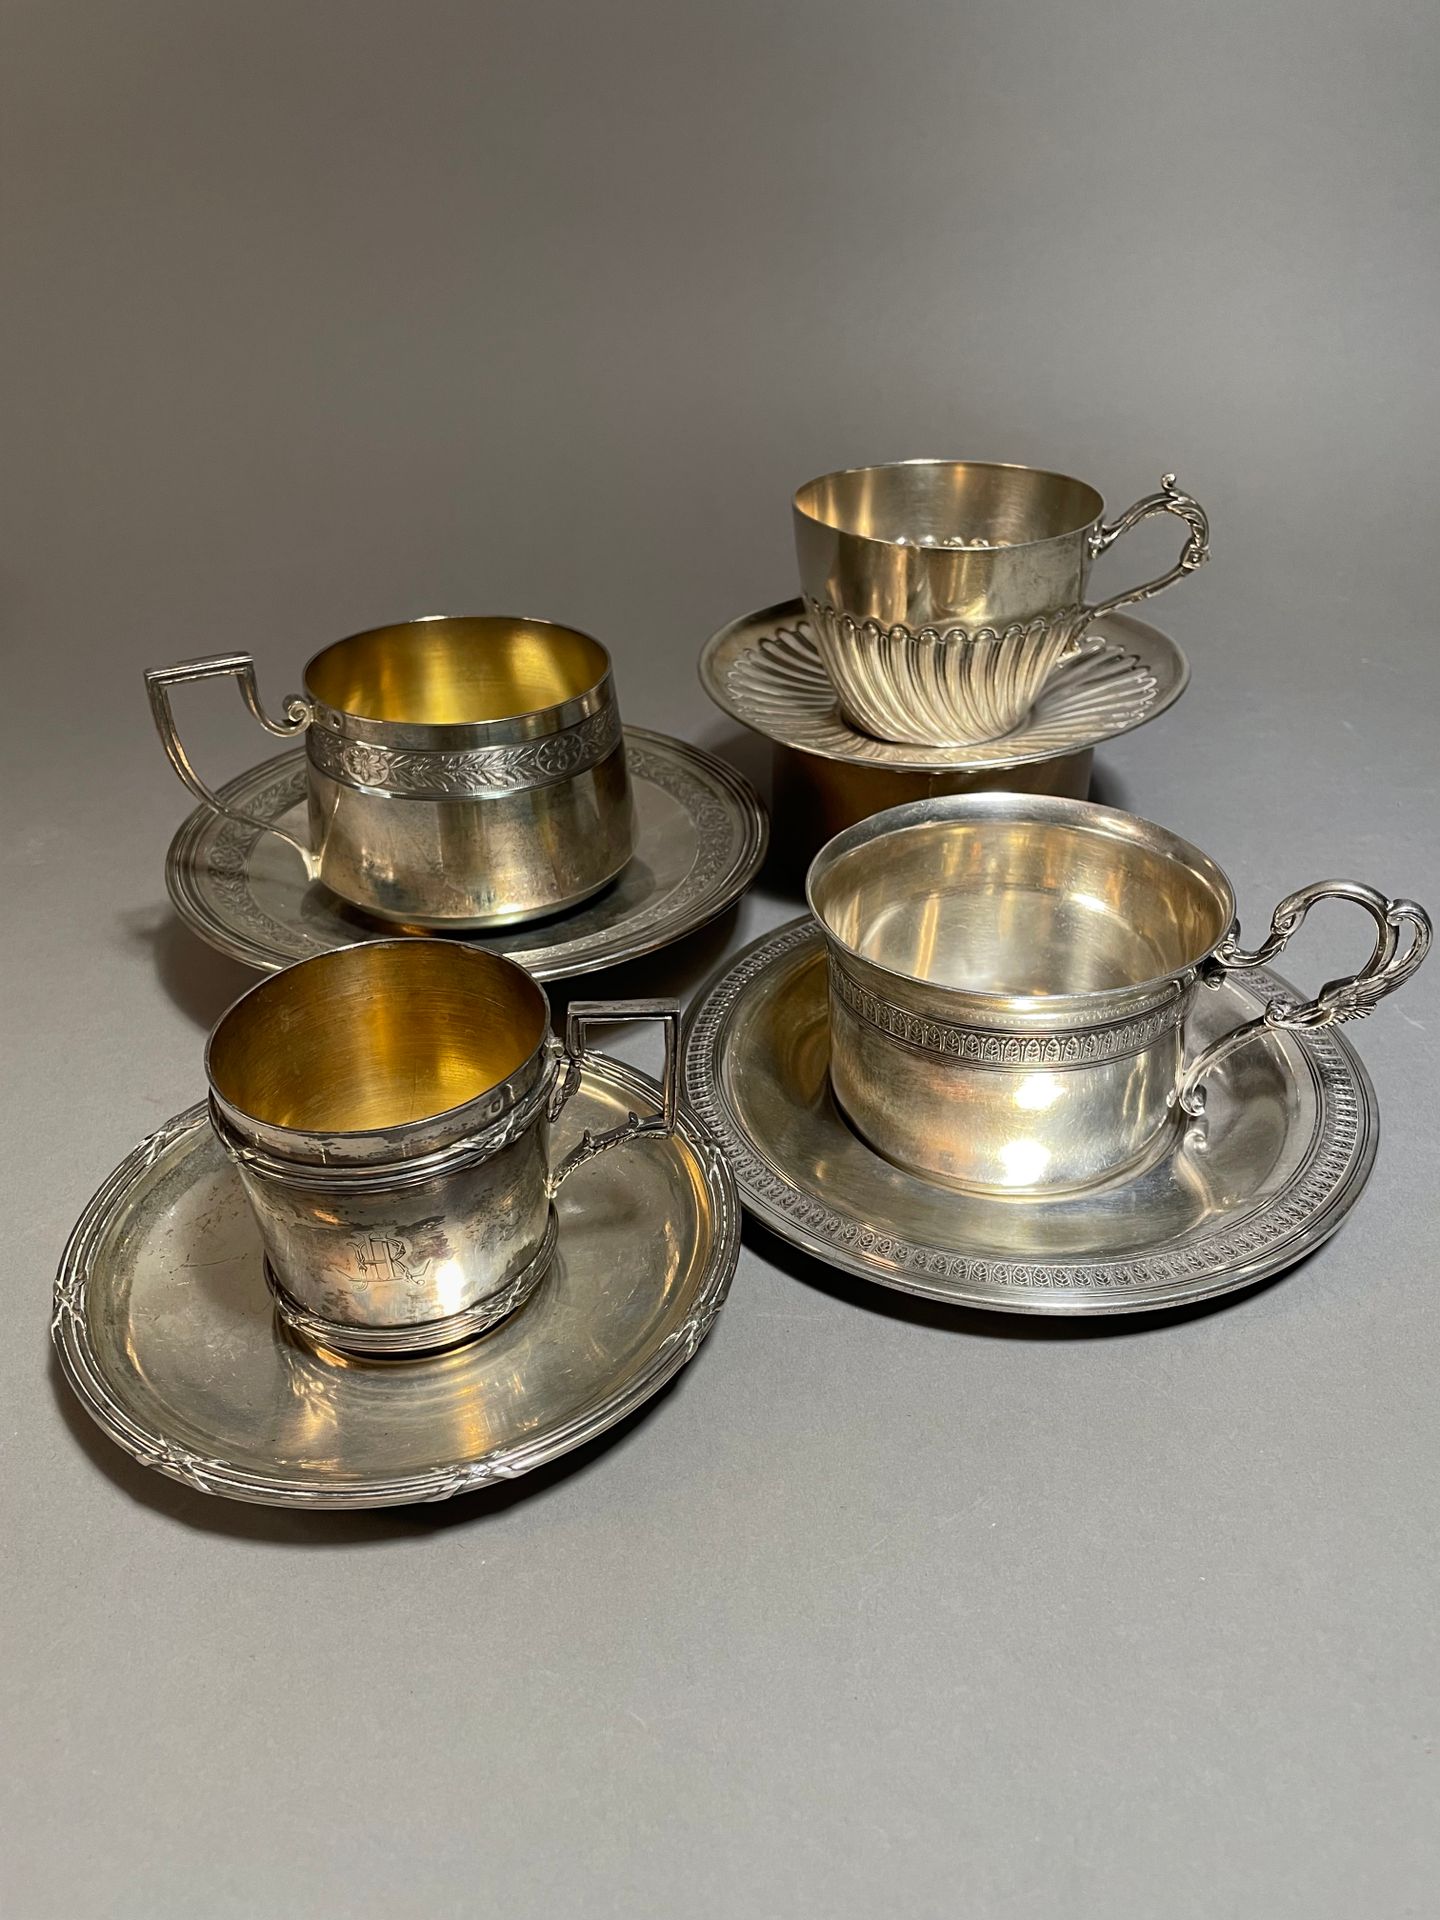 Null Set of four cups and saucers
In silver 925°°°
Different models
P : 1218 g